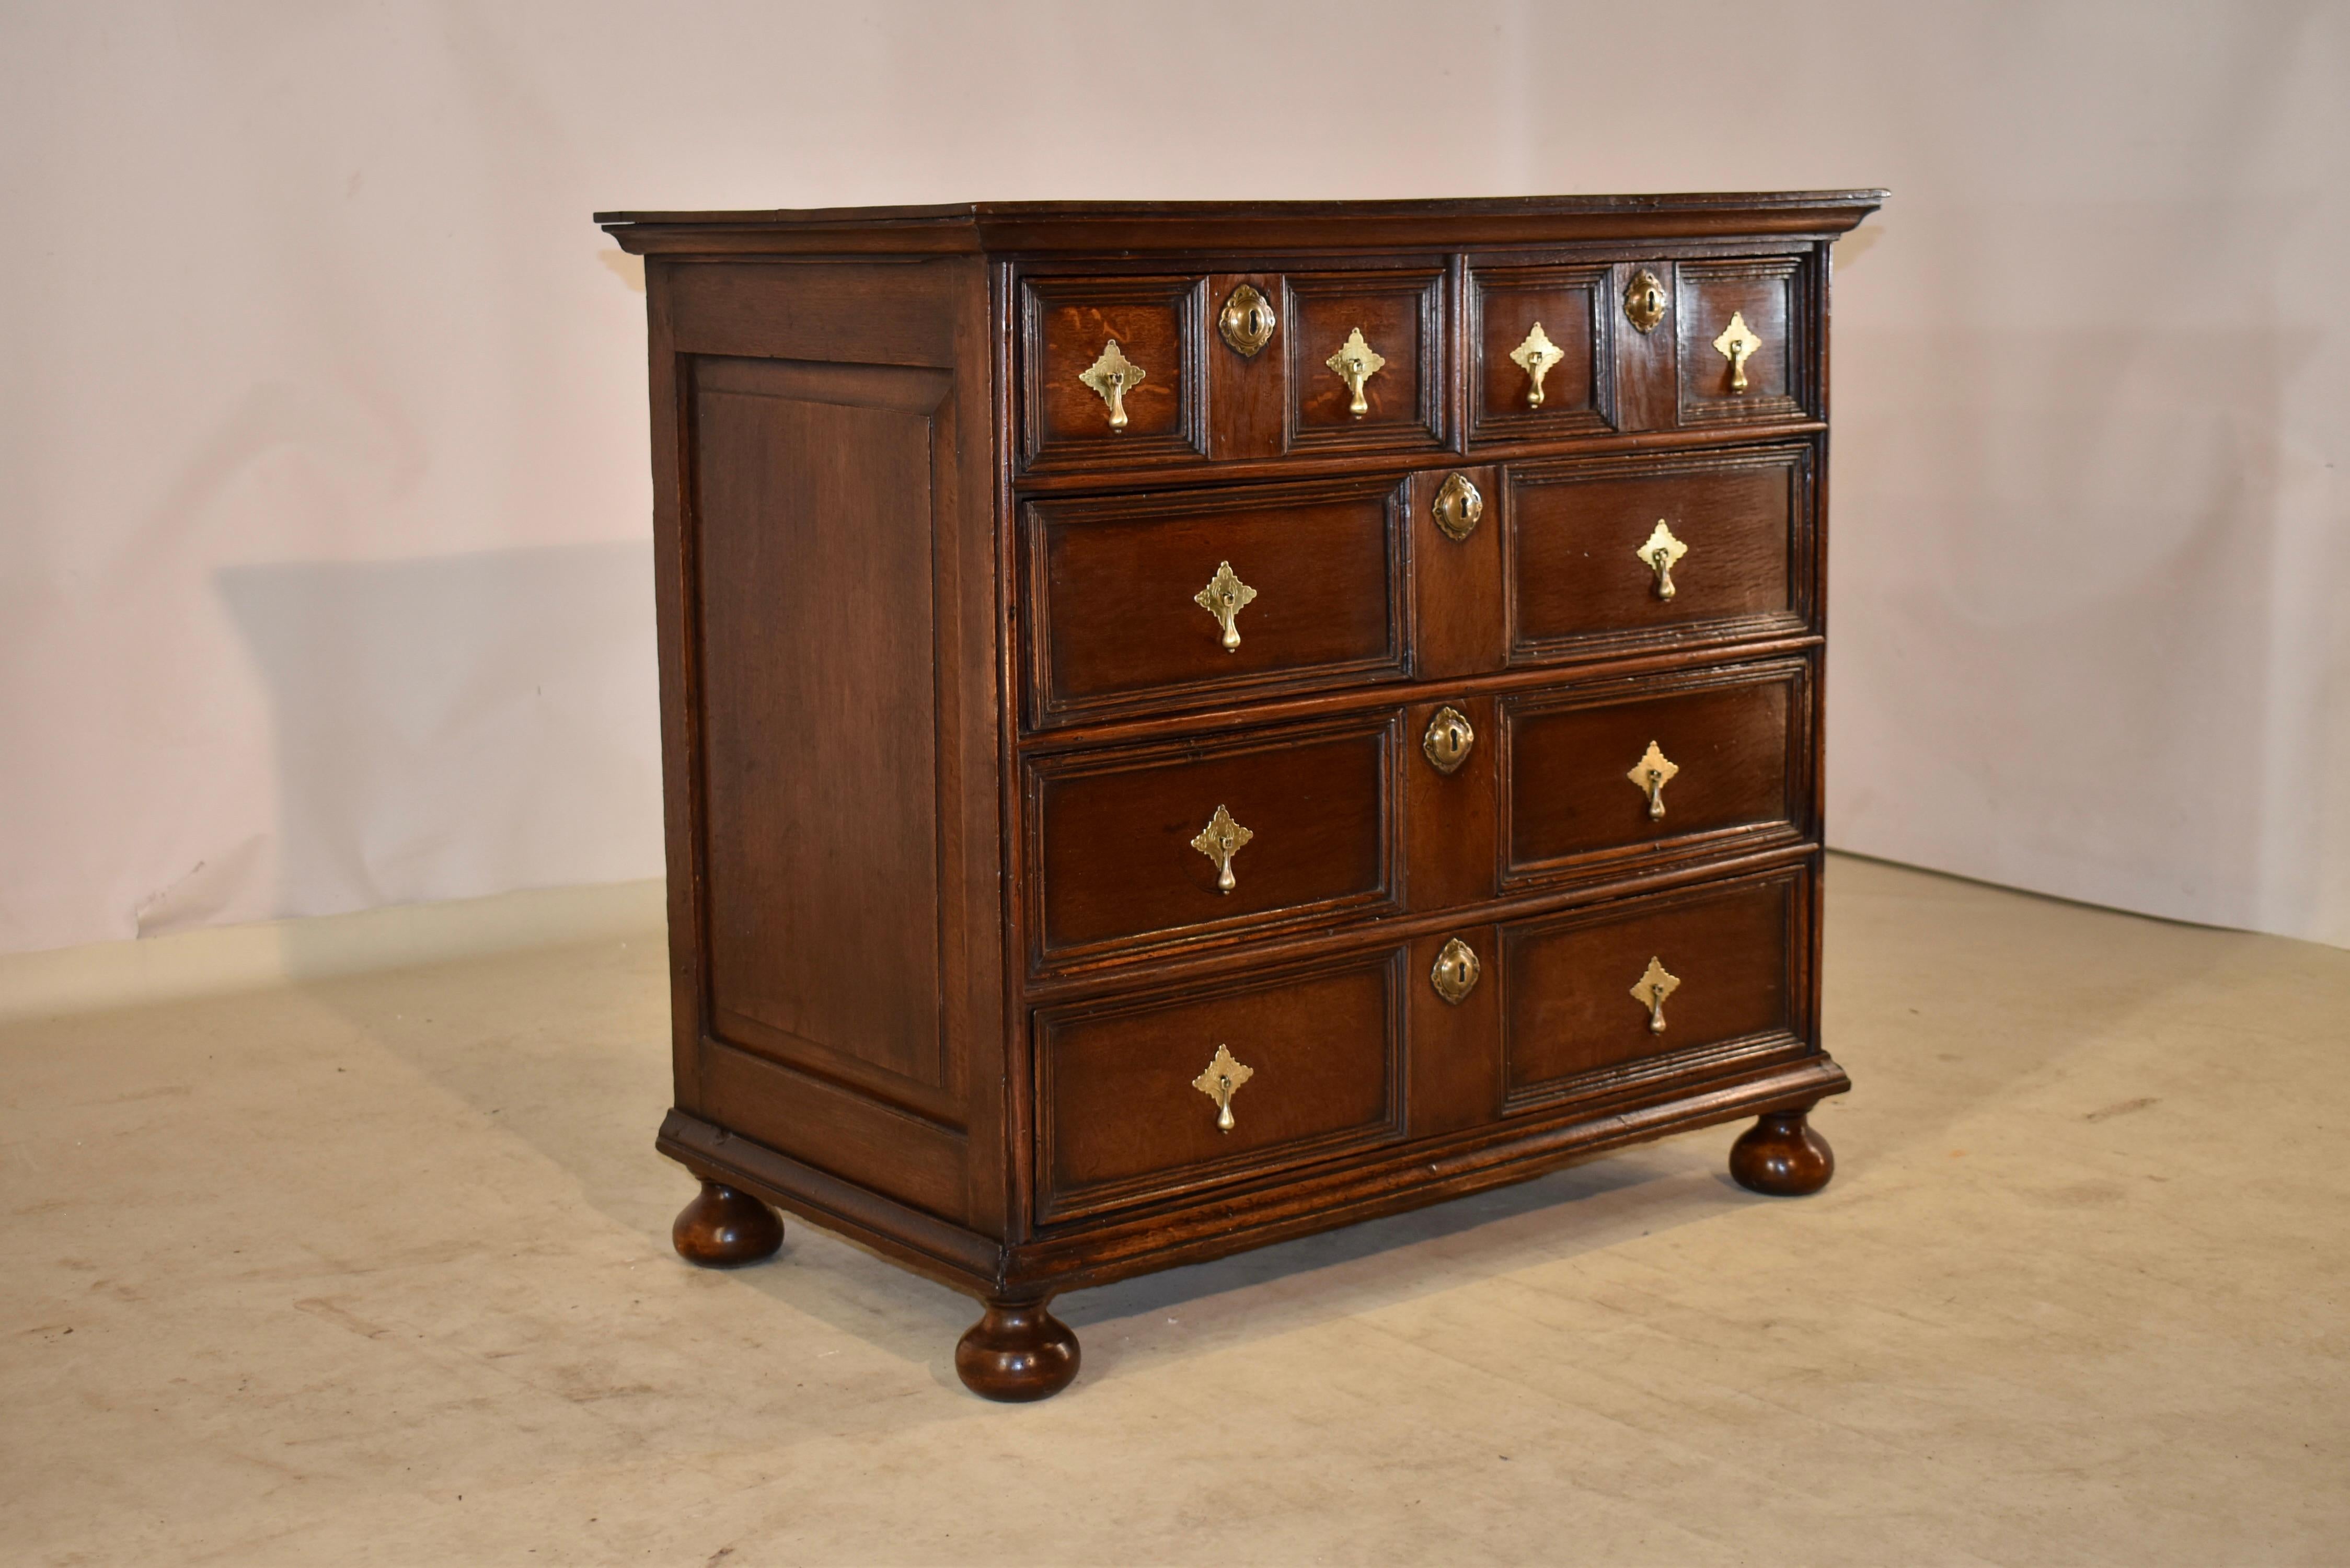 Early 18th century oak paneled chest of drawers from England. The top is made from two boards, following down to hand raised paneled sides, and two drawers over three drawers in the front. All of the drawers have gorgeous molding framing the drawer